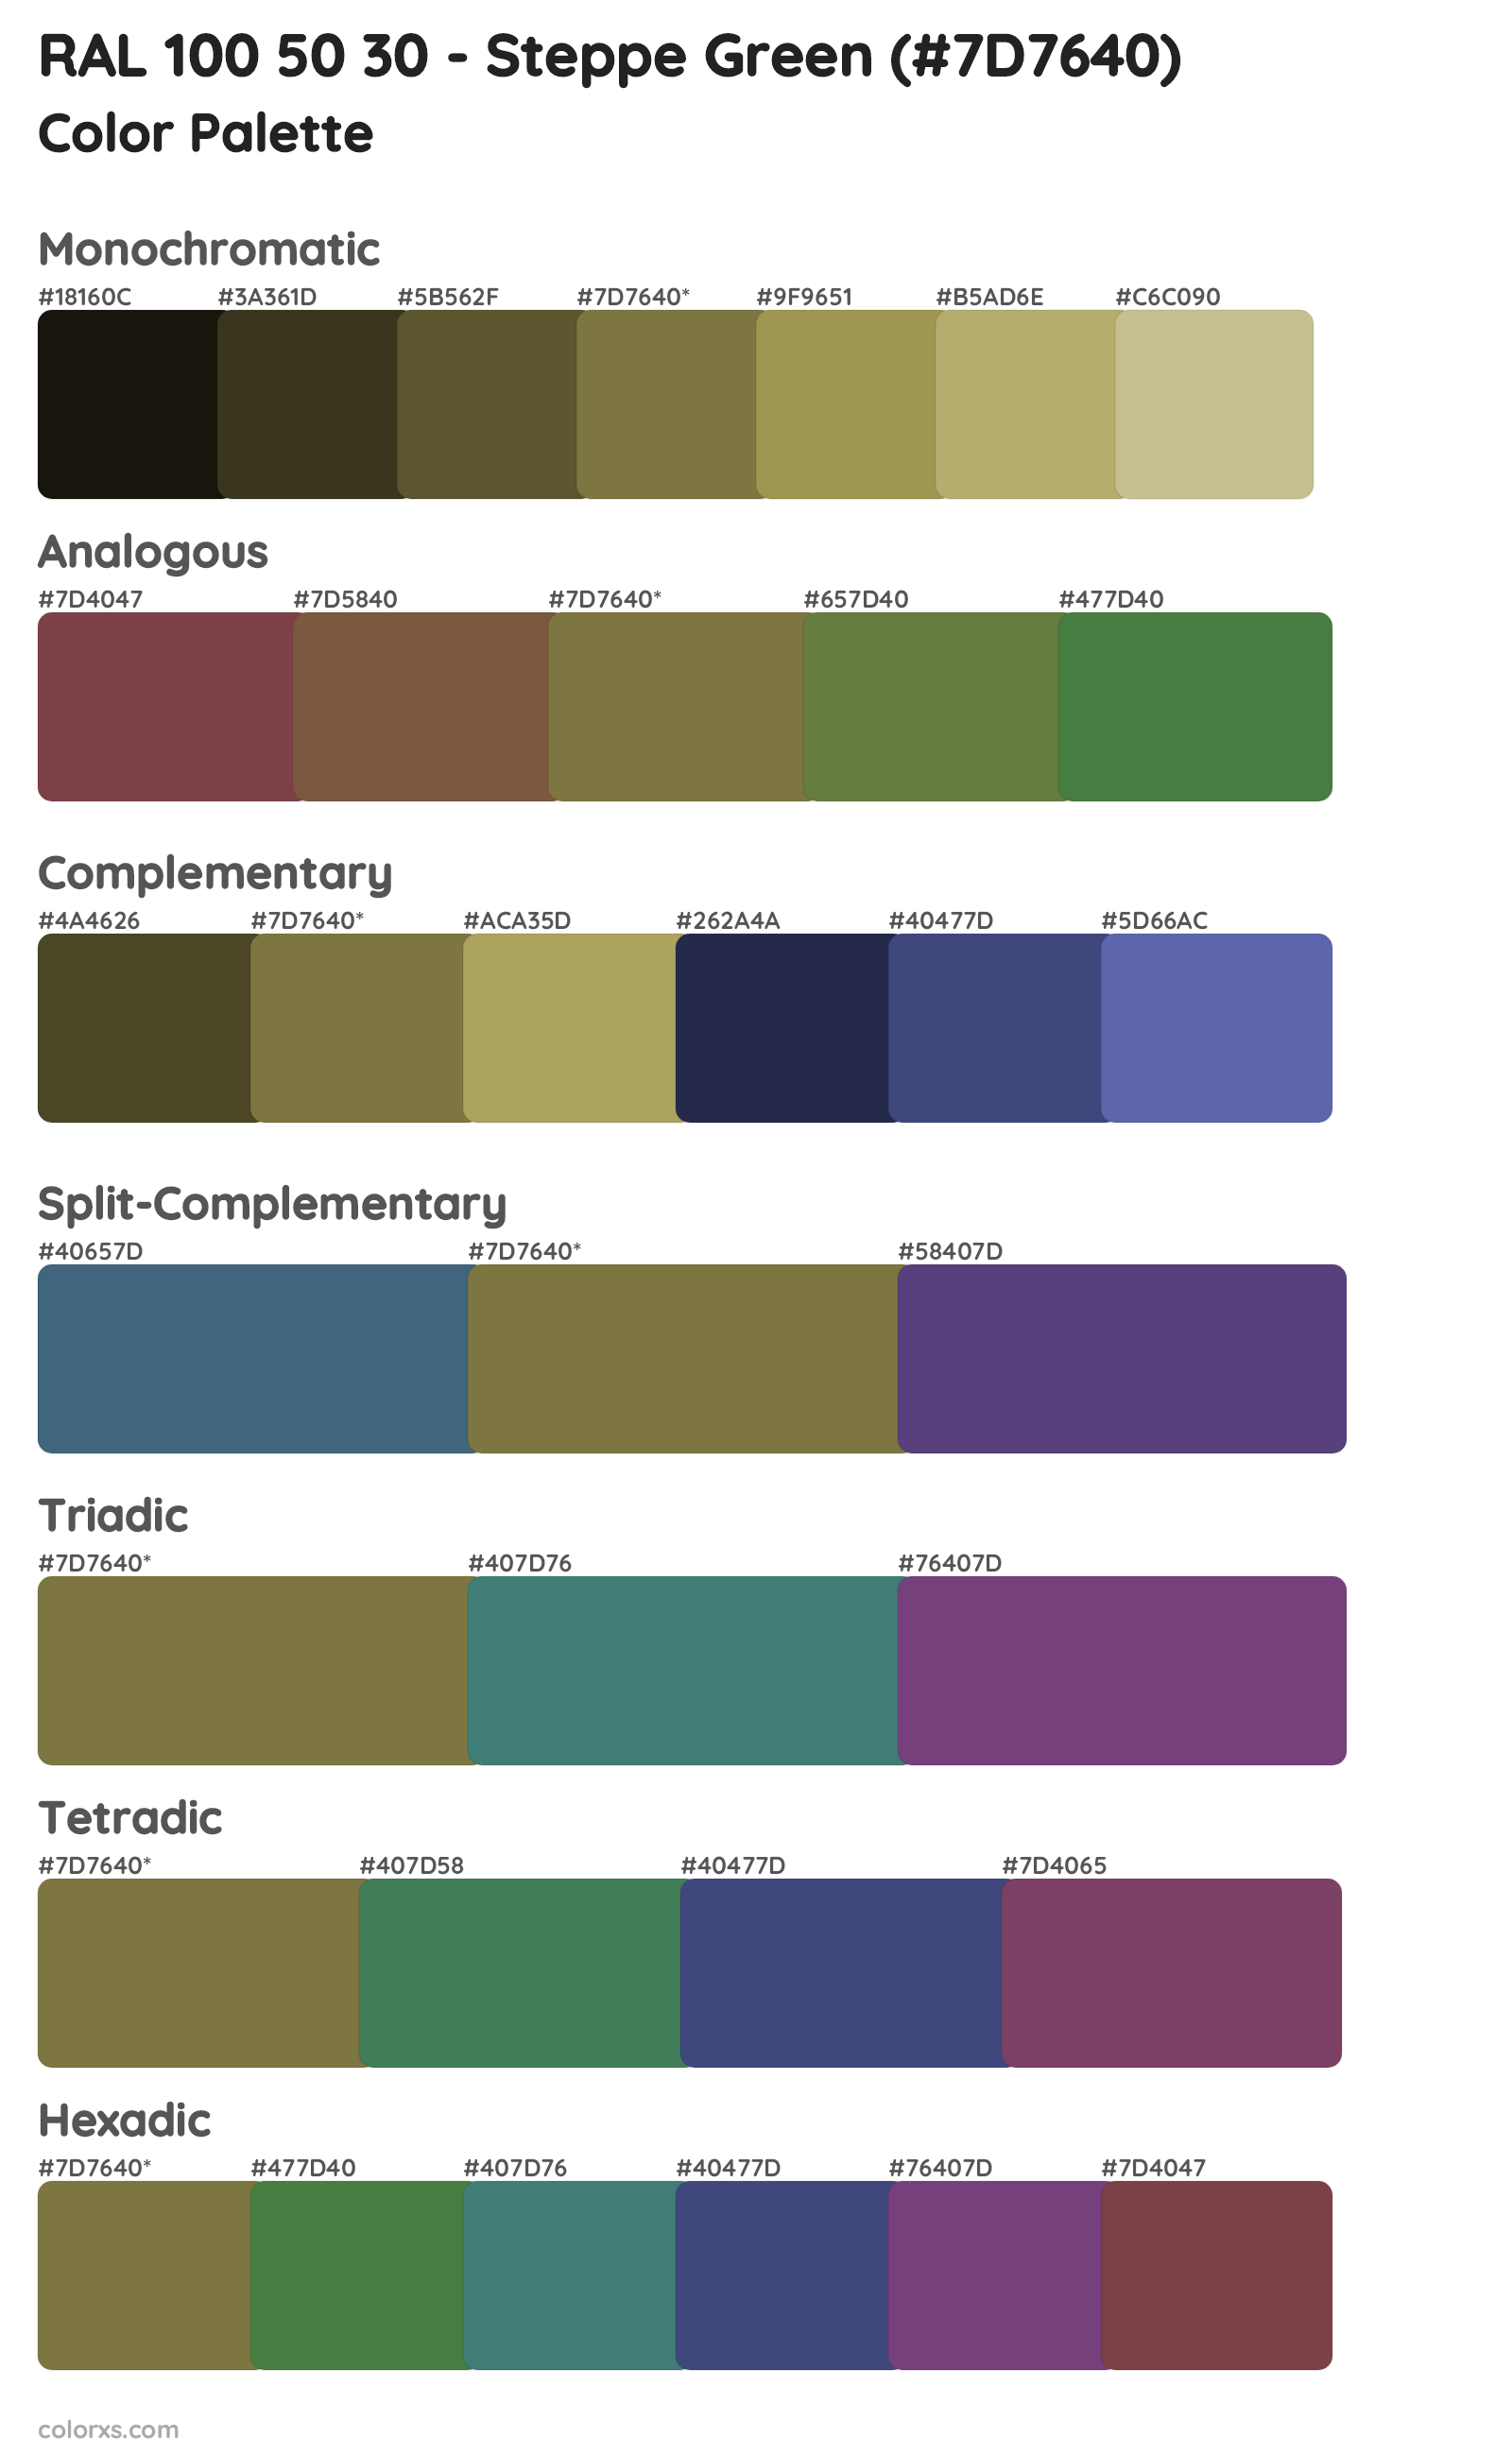 RAL 100 50 30 - Steppe Green Color Scheme Palettes